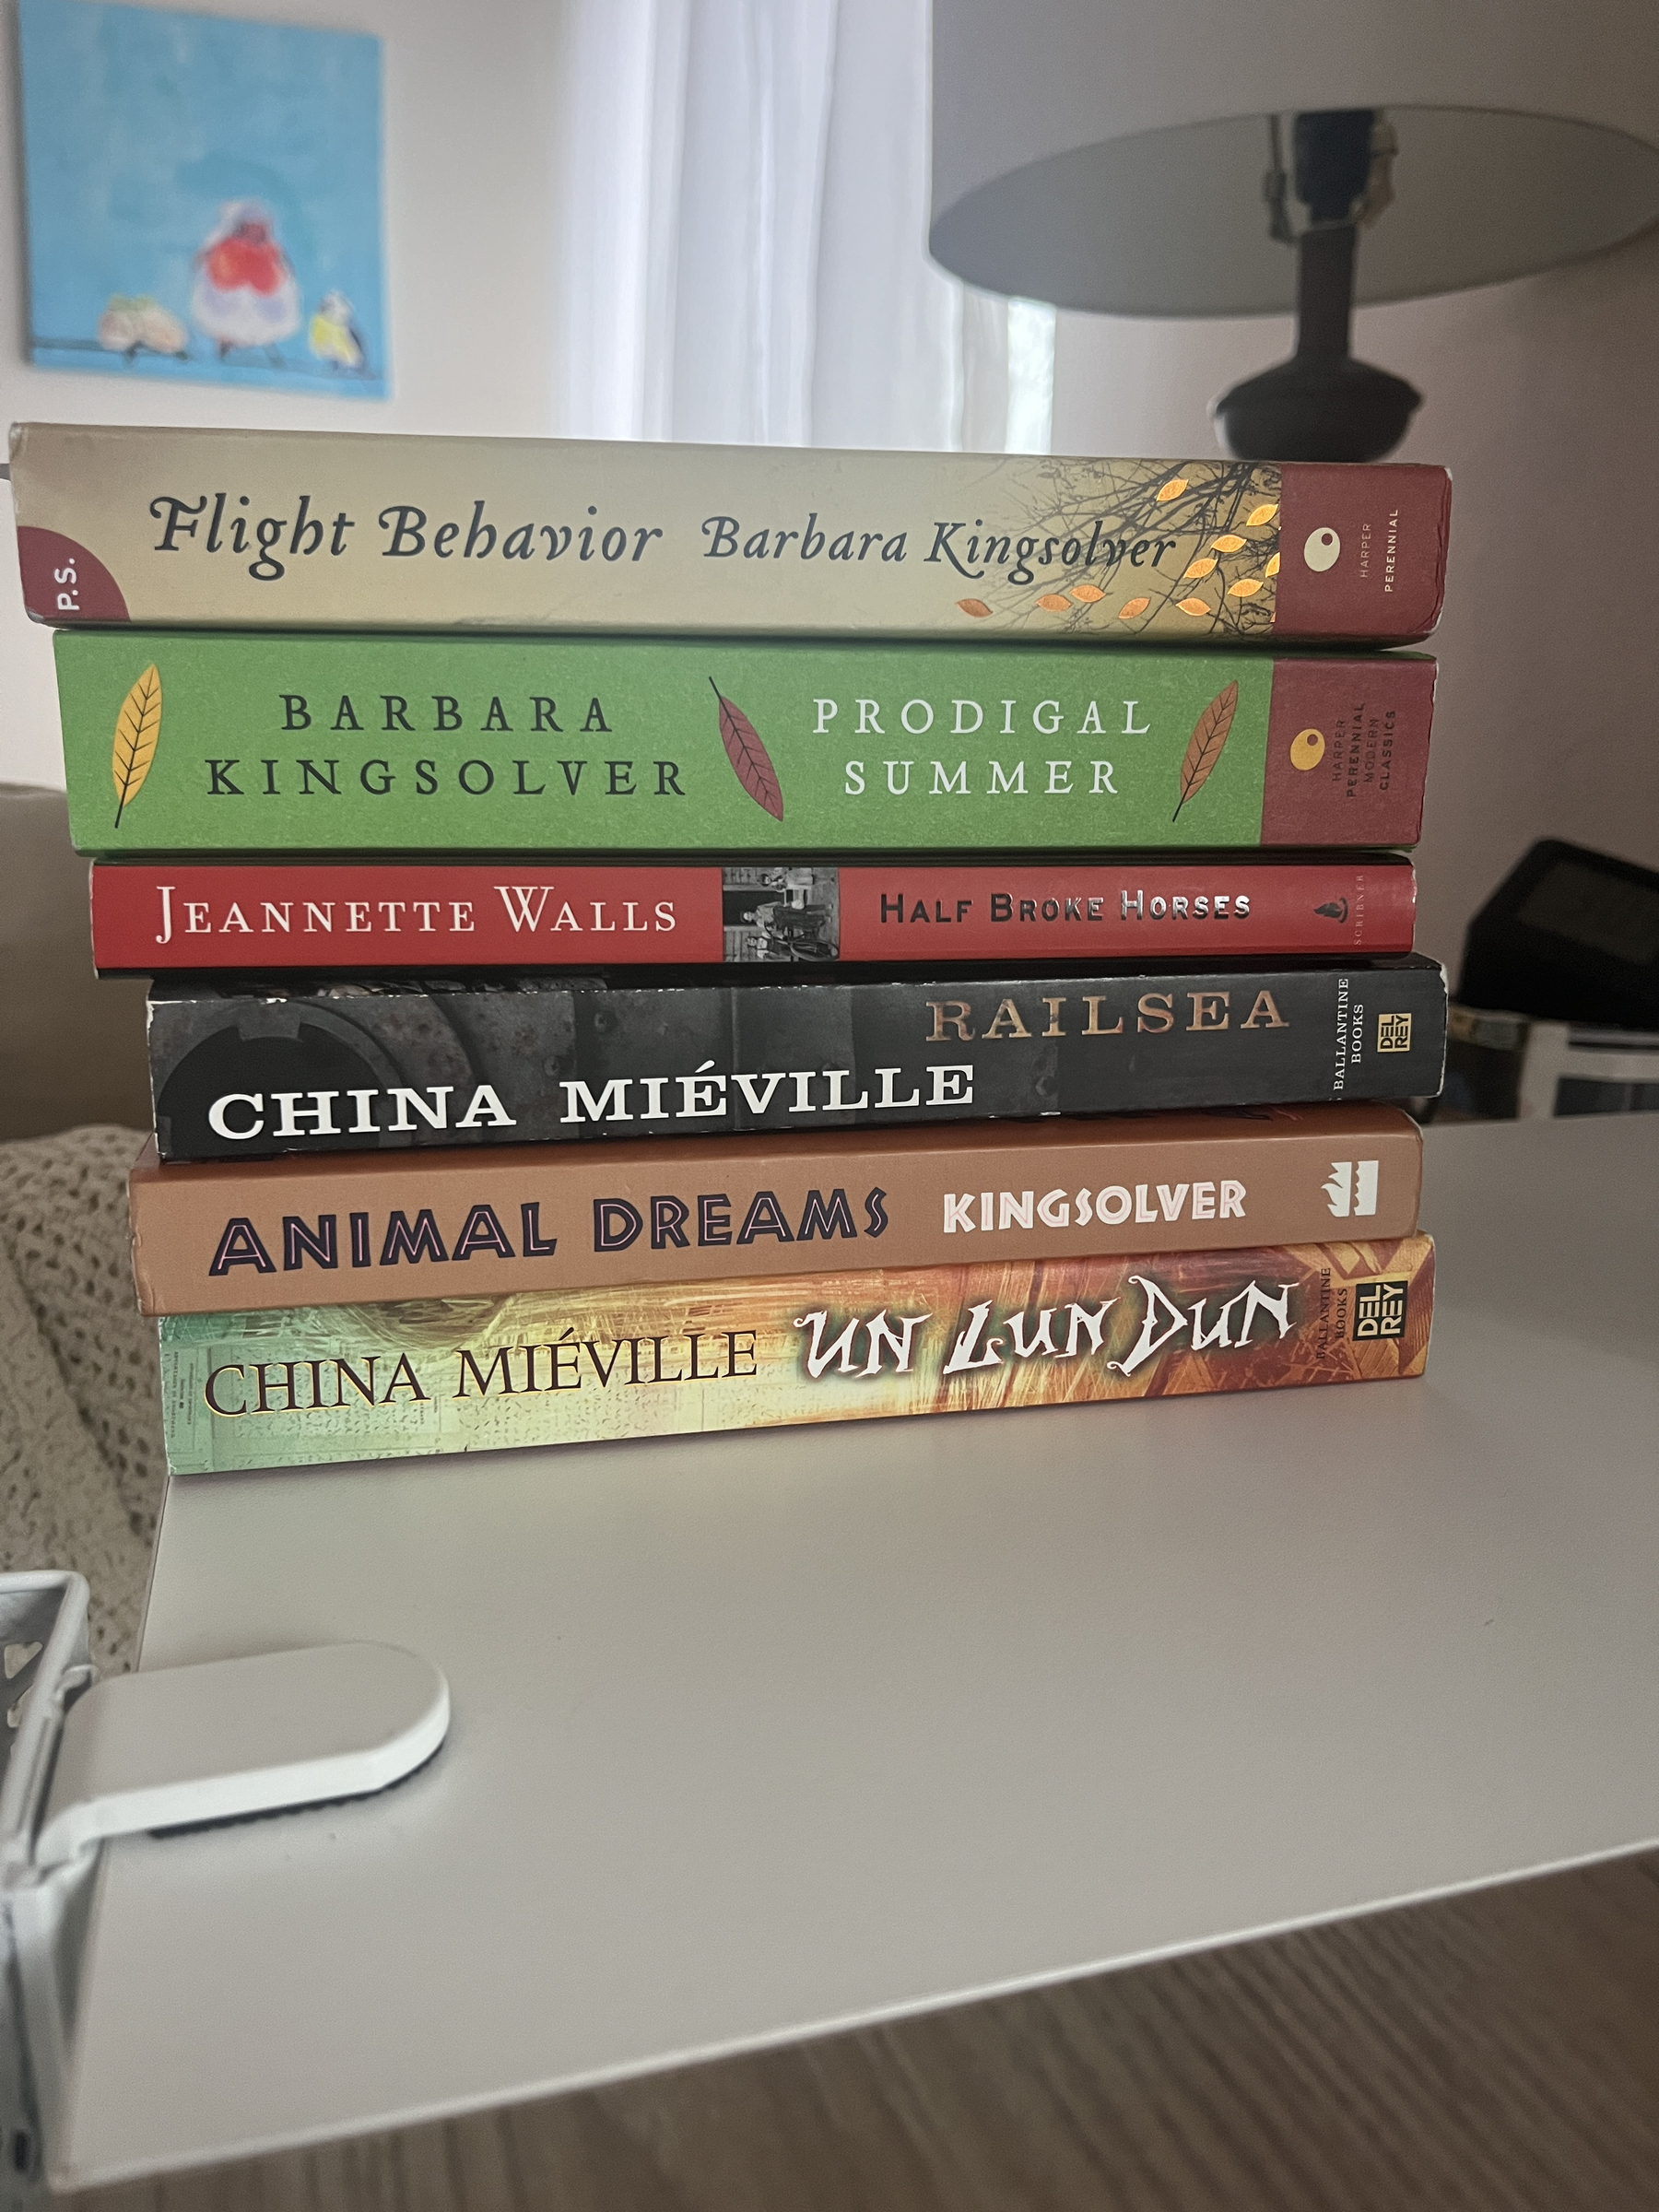 Stack of books on a desk including titles from Barbara Kingsolver, China Miéville, and Jeanette Walls